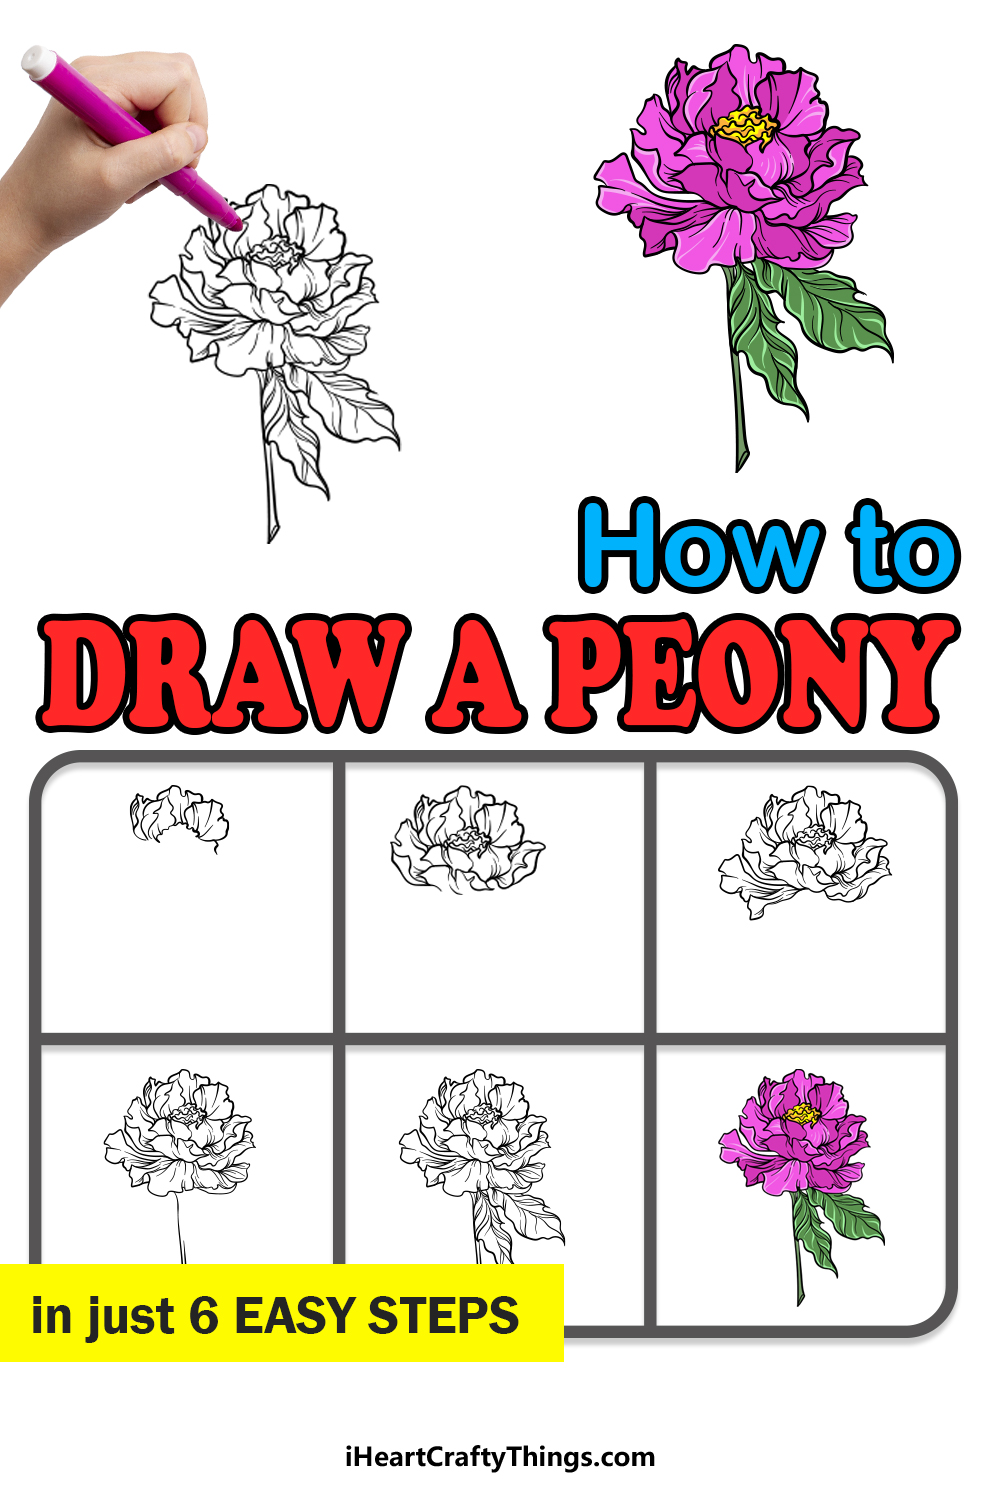 how to draw a peony in 6 easy steps